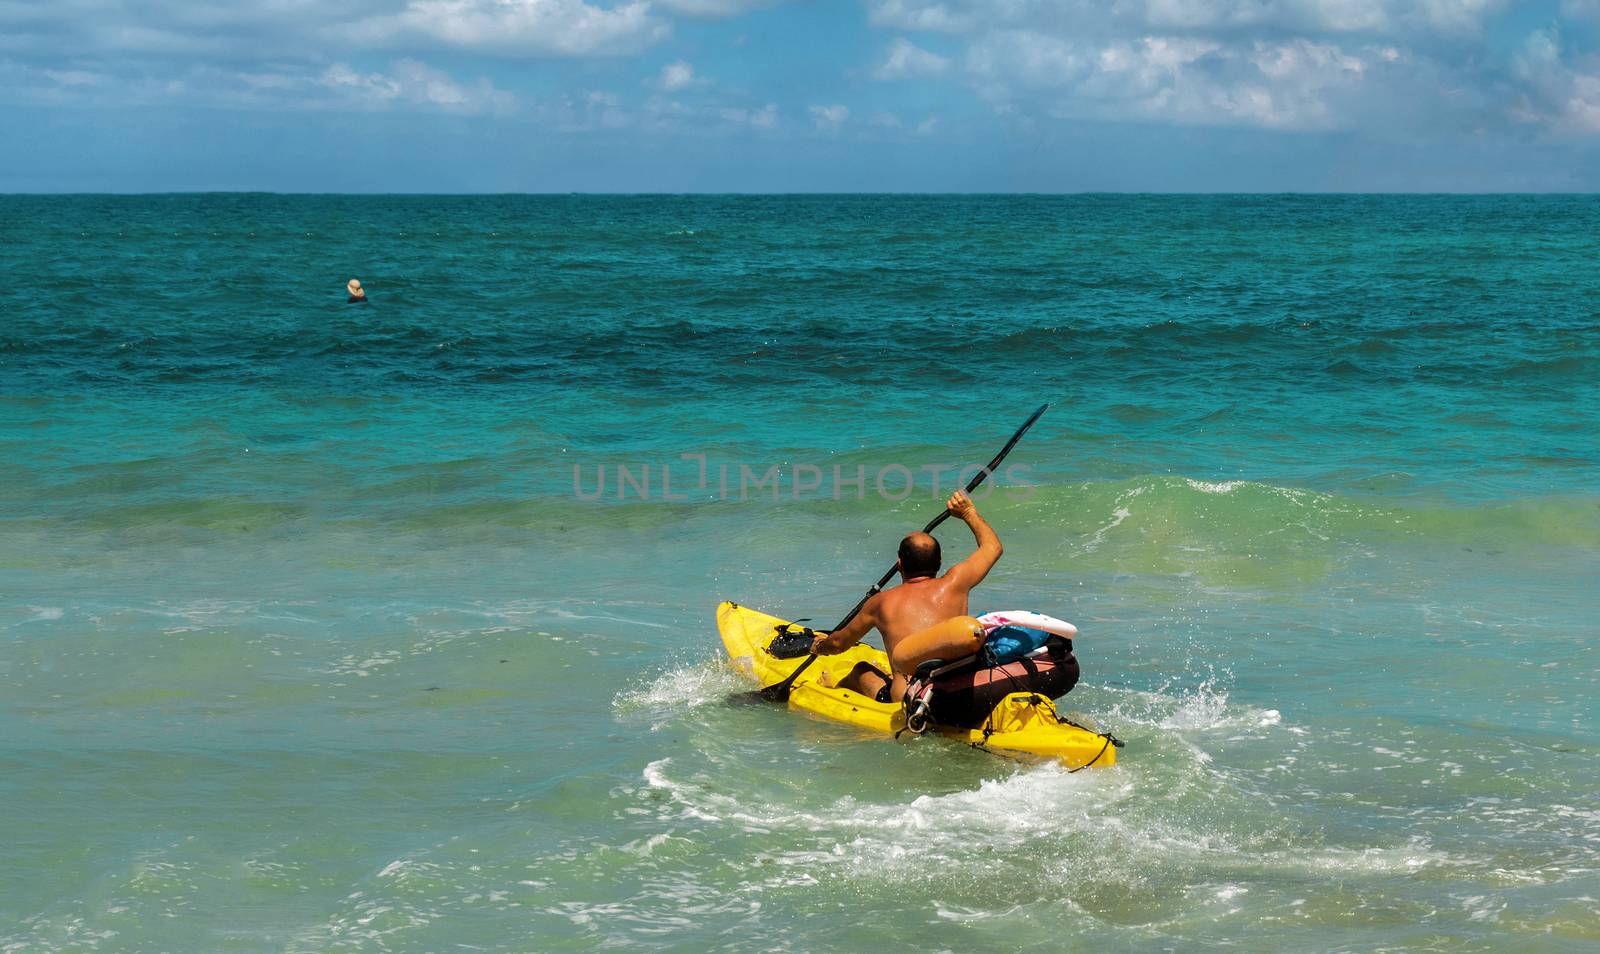 In the days of the swimming season at sea are lifeguard training on kayaks